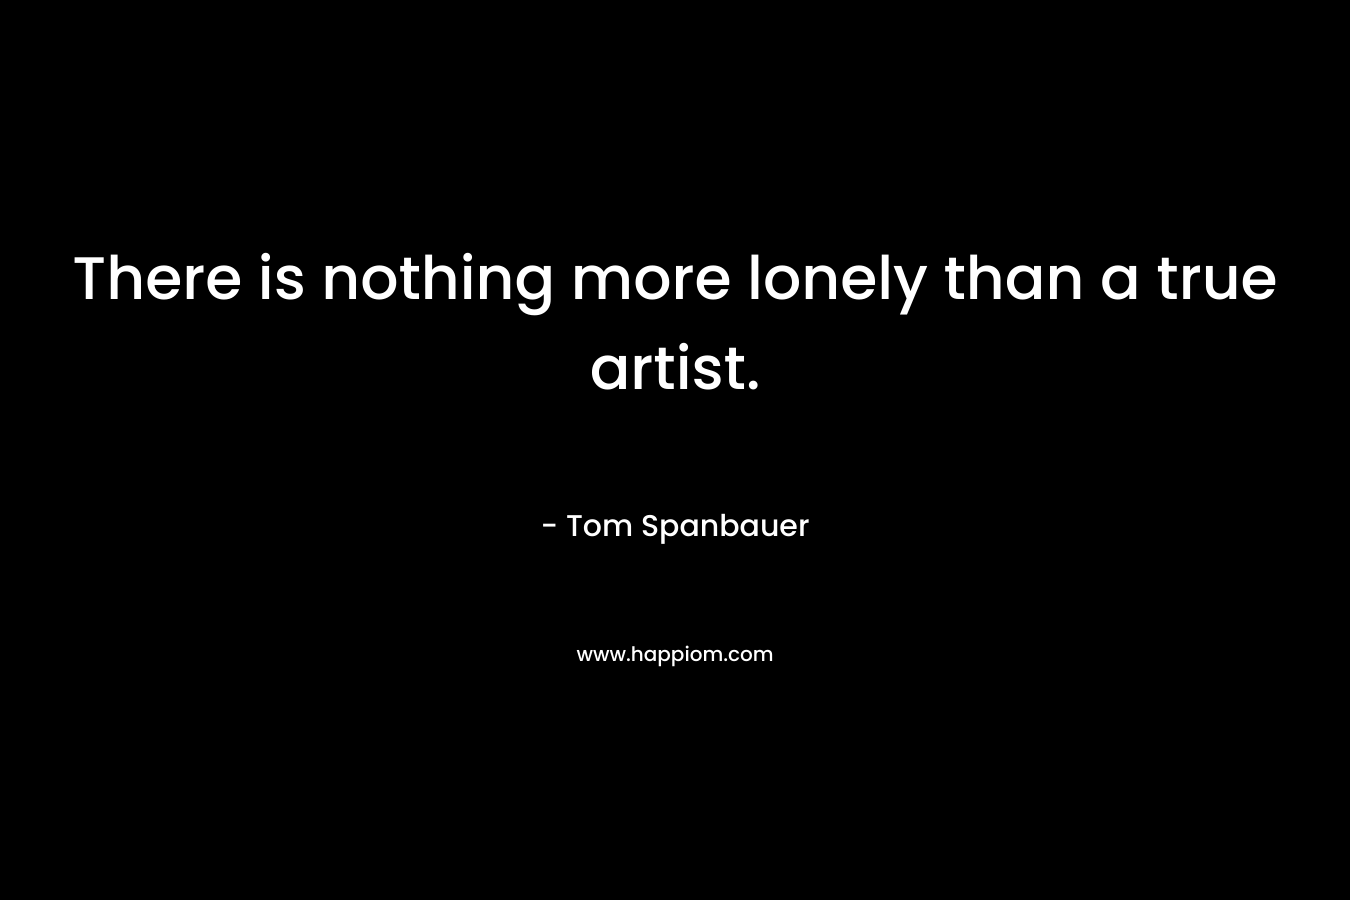 There is nothing more lonely than a true artist.